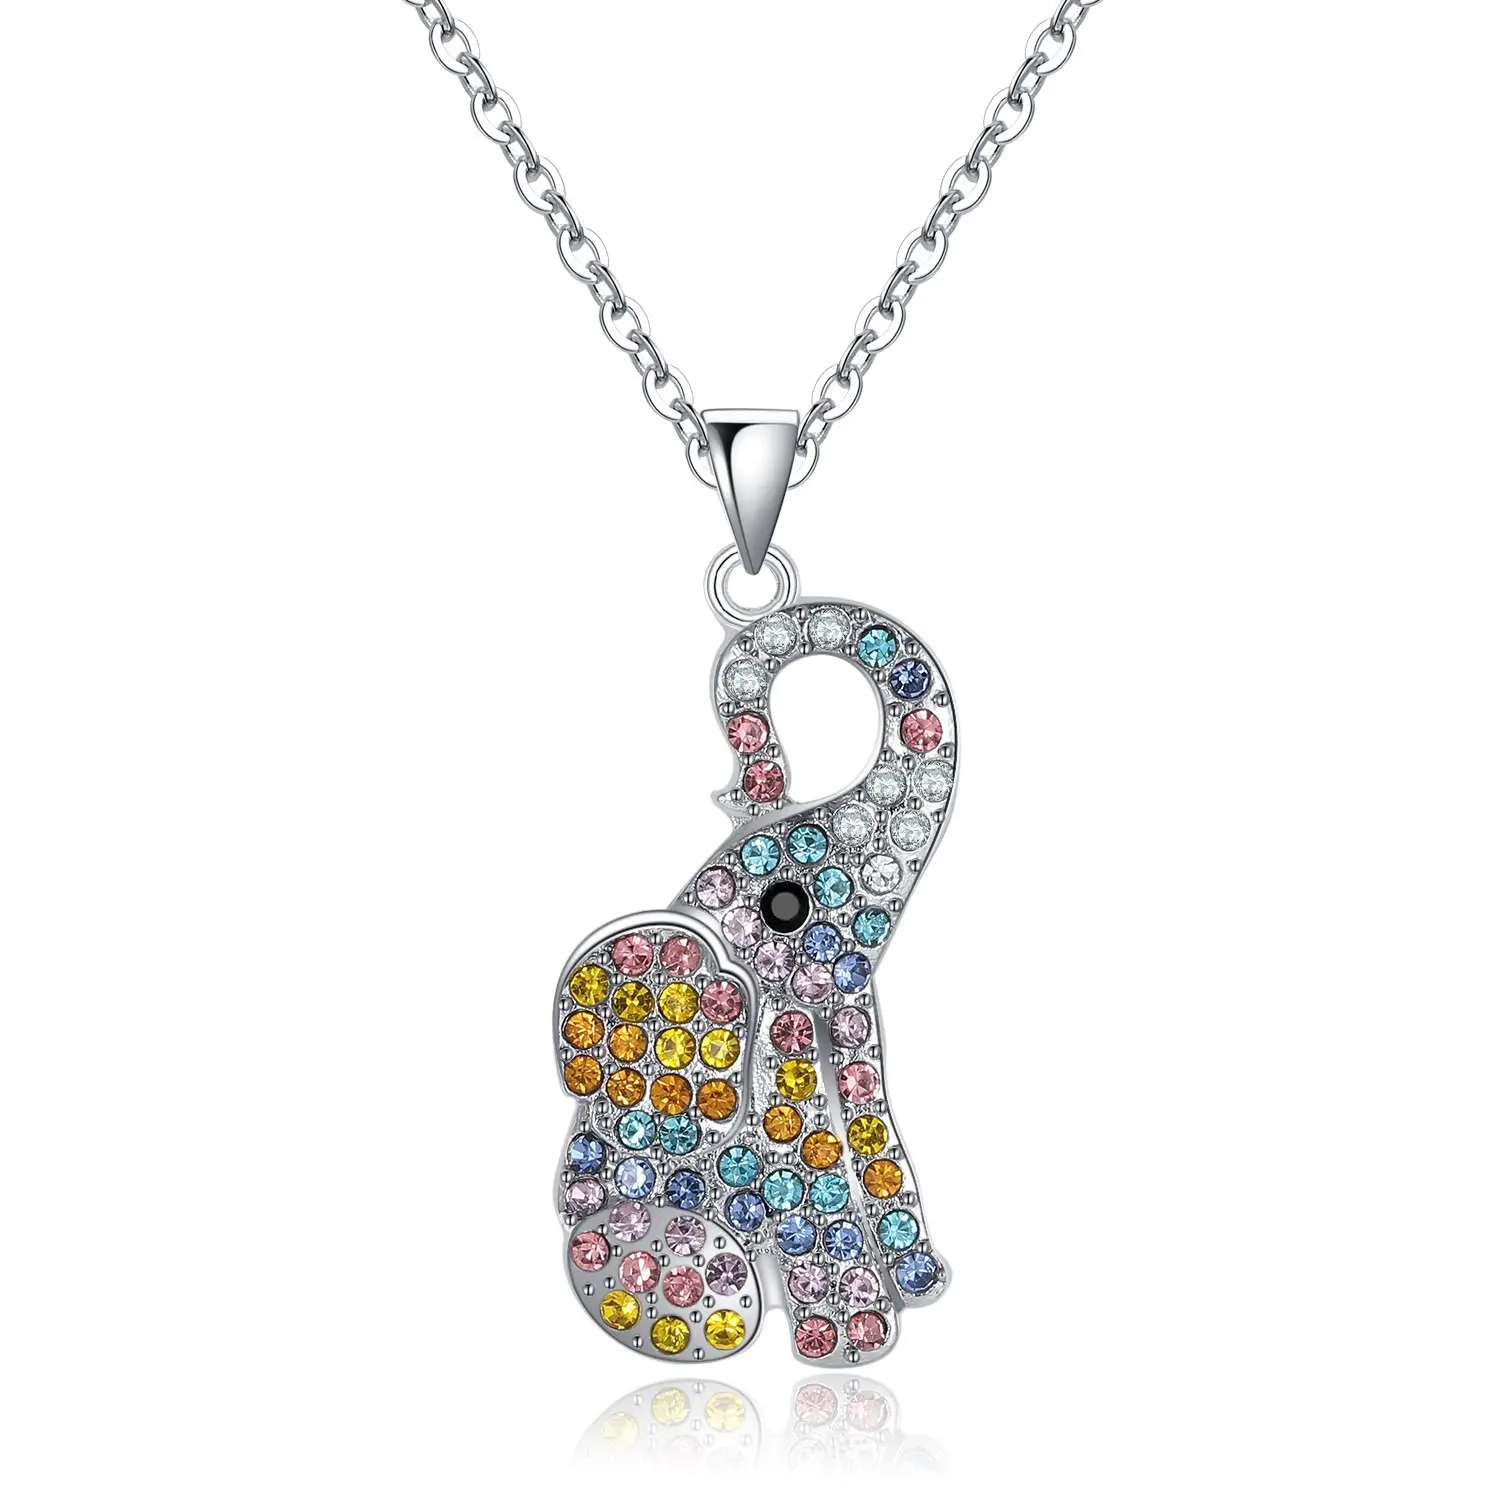 Colorful Elephant Necklace Bohemian Ethnic Style Children's Day Colorful Animal jeweller accessories girls necklaces